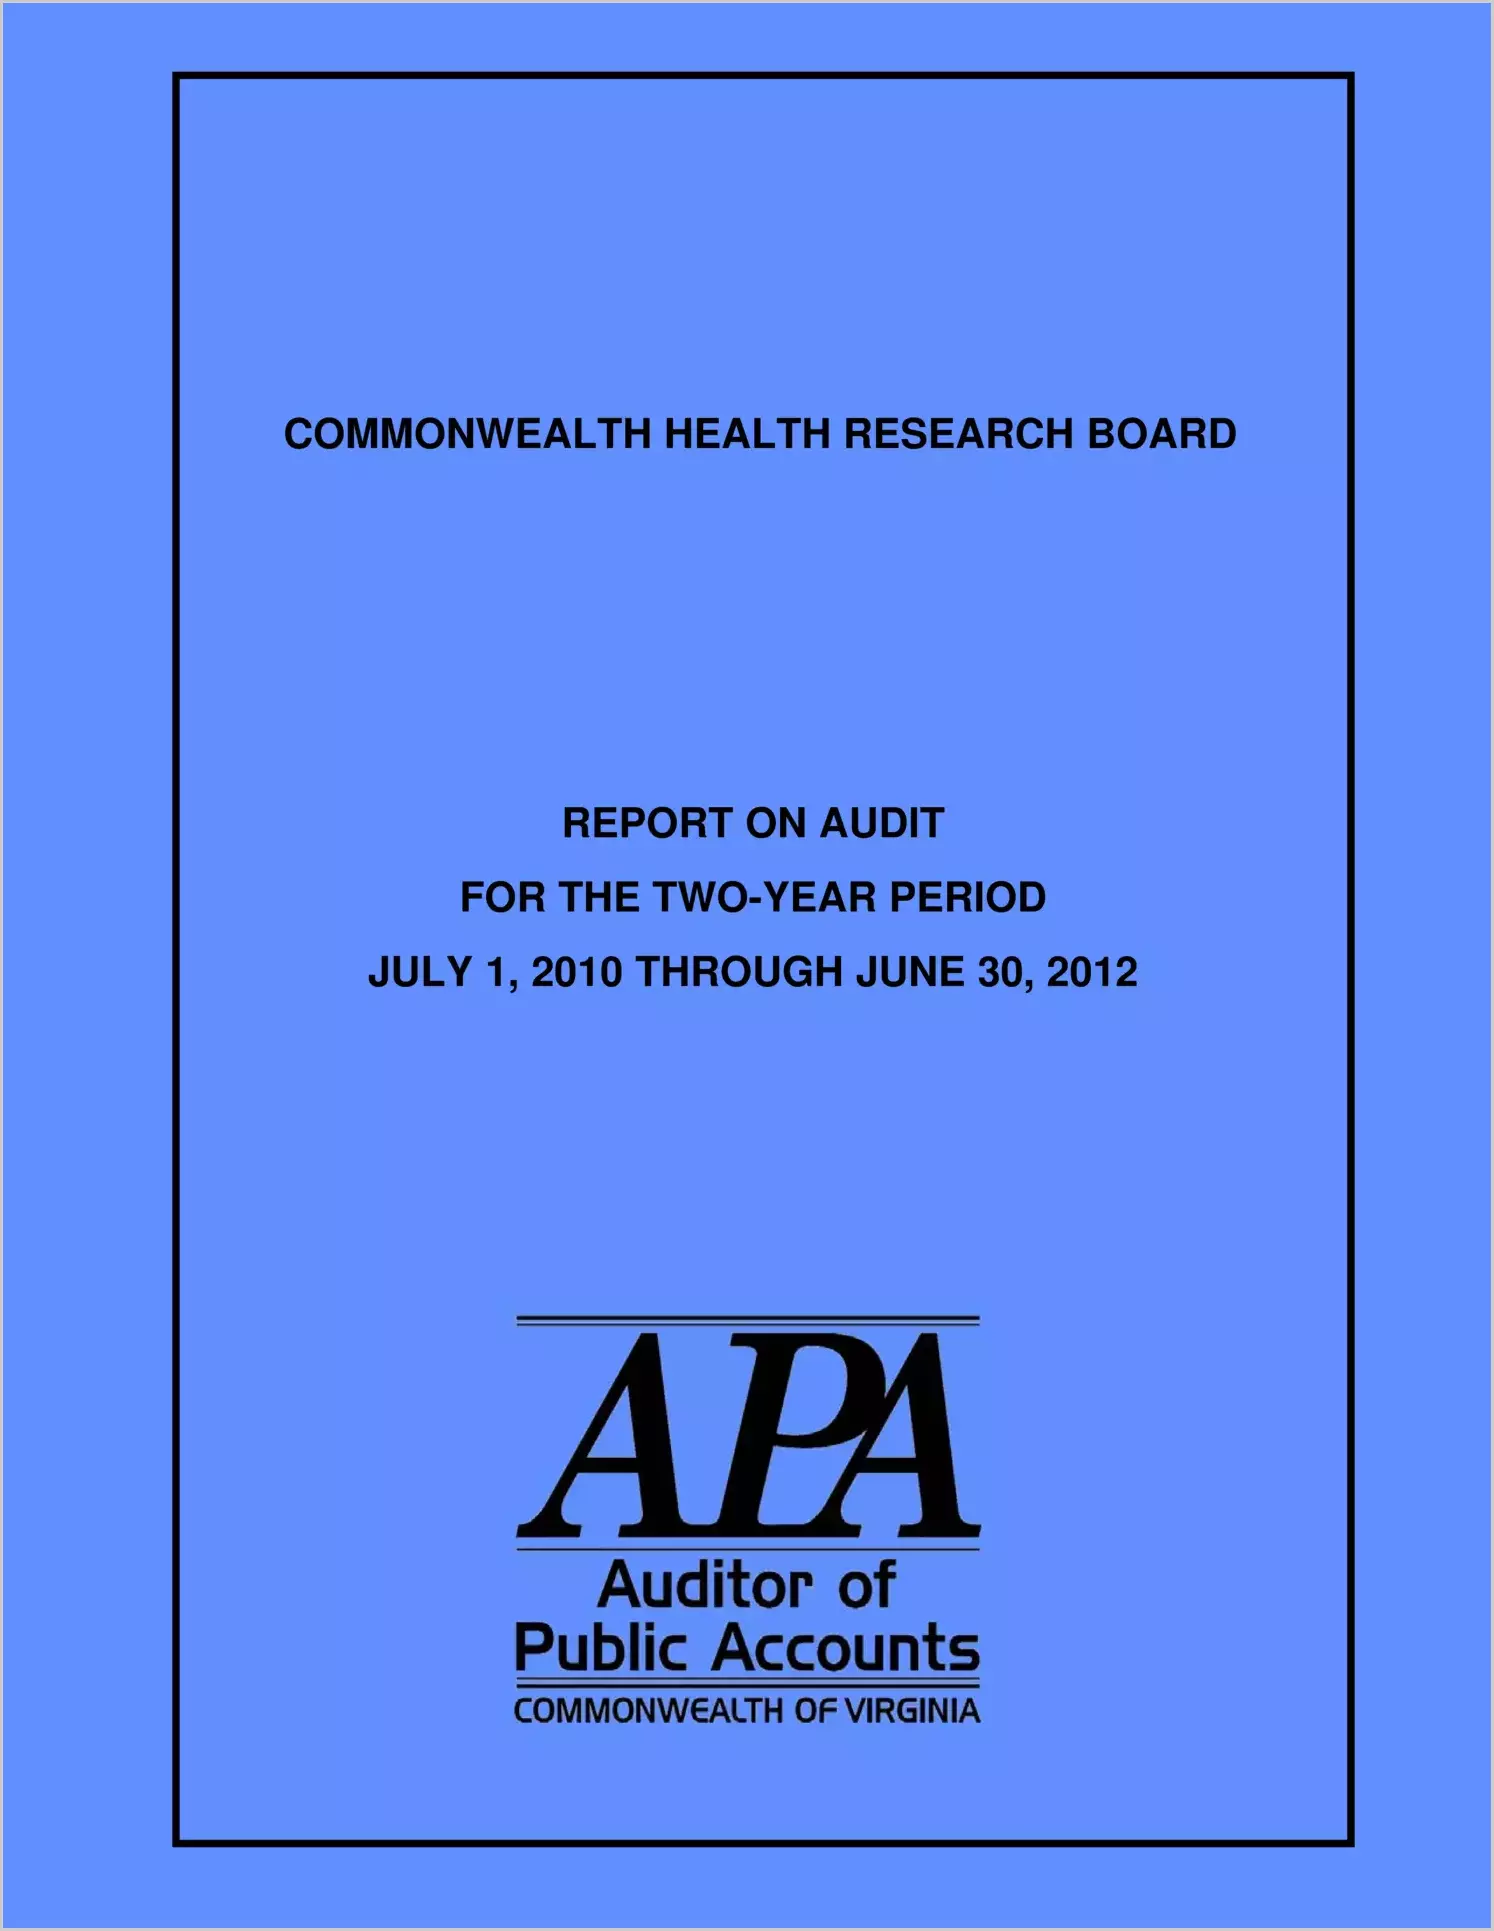 Commonwealth Health Research Board for the two-year period June 30, 2010 through June 30, 2012